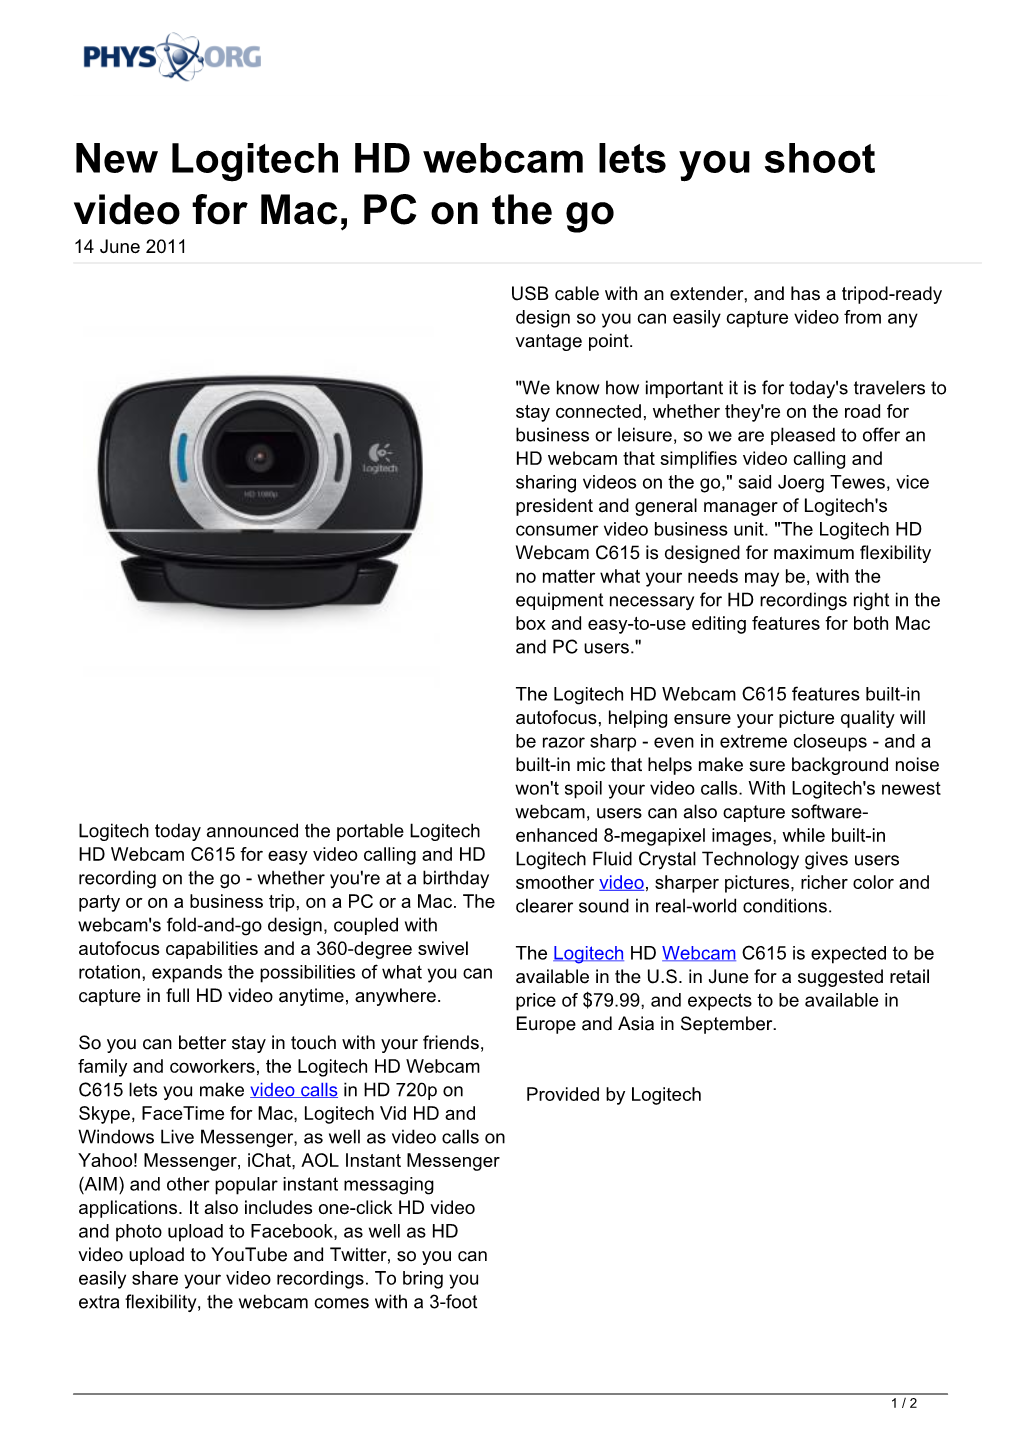 New Logitech HD Webcam Lets You Shoot Video for Mac, PC on the Go 14 June 2011